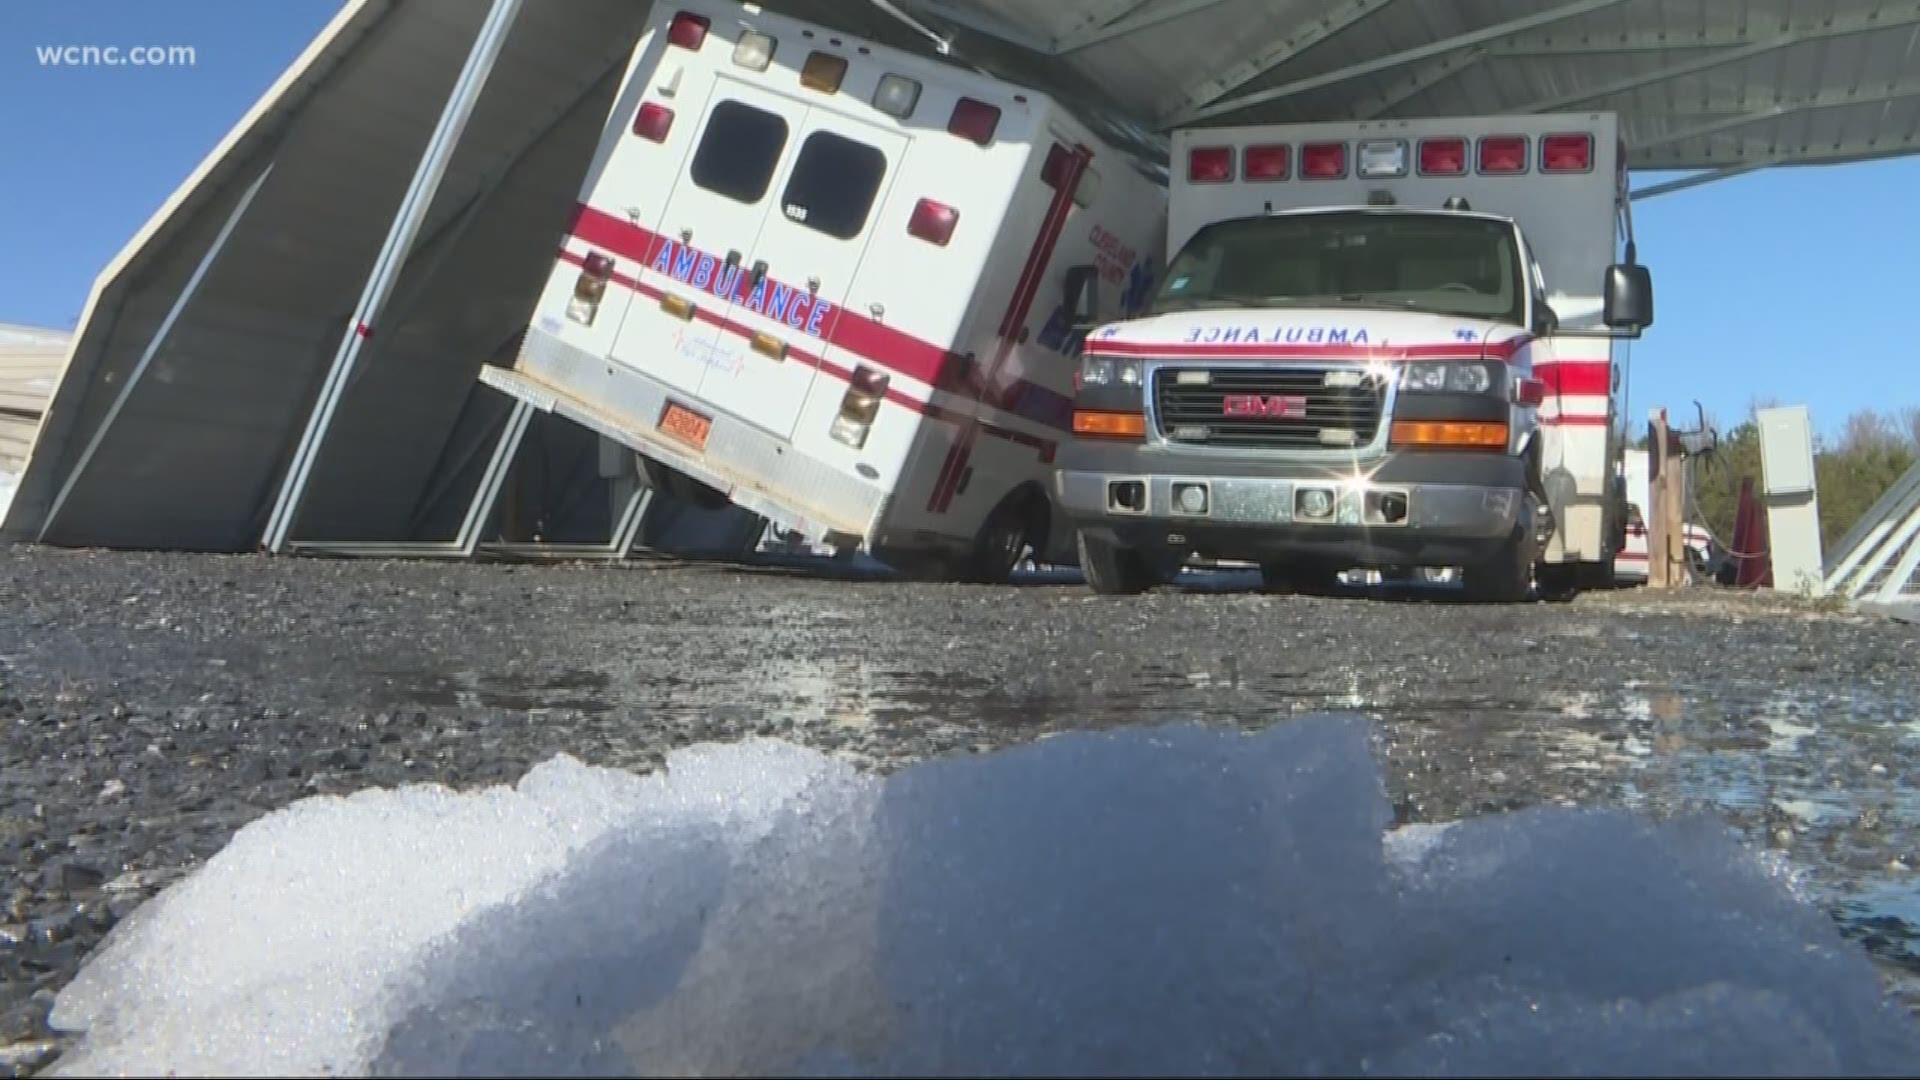 Several ambulances were damaged in Cleveland County after the car port they were under collapsed from the weight of the snow on it.